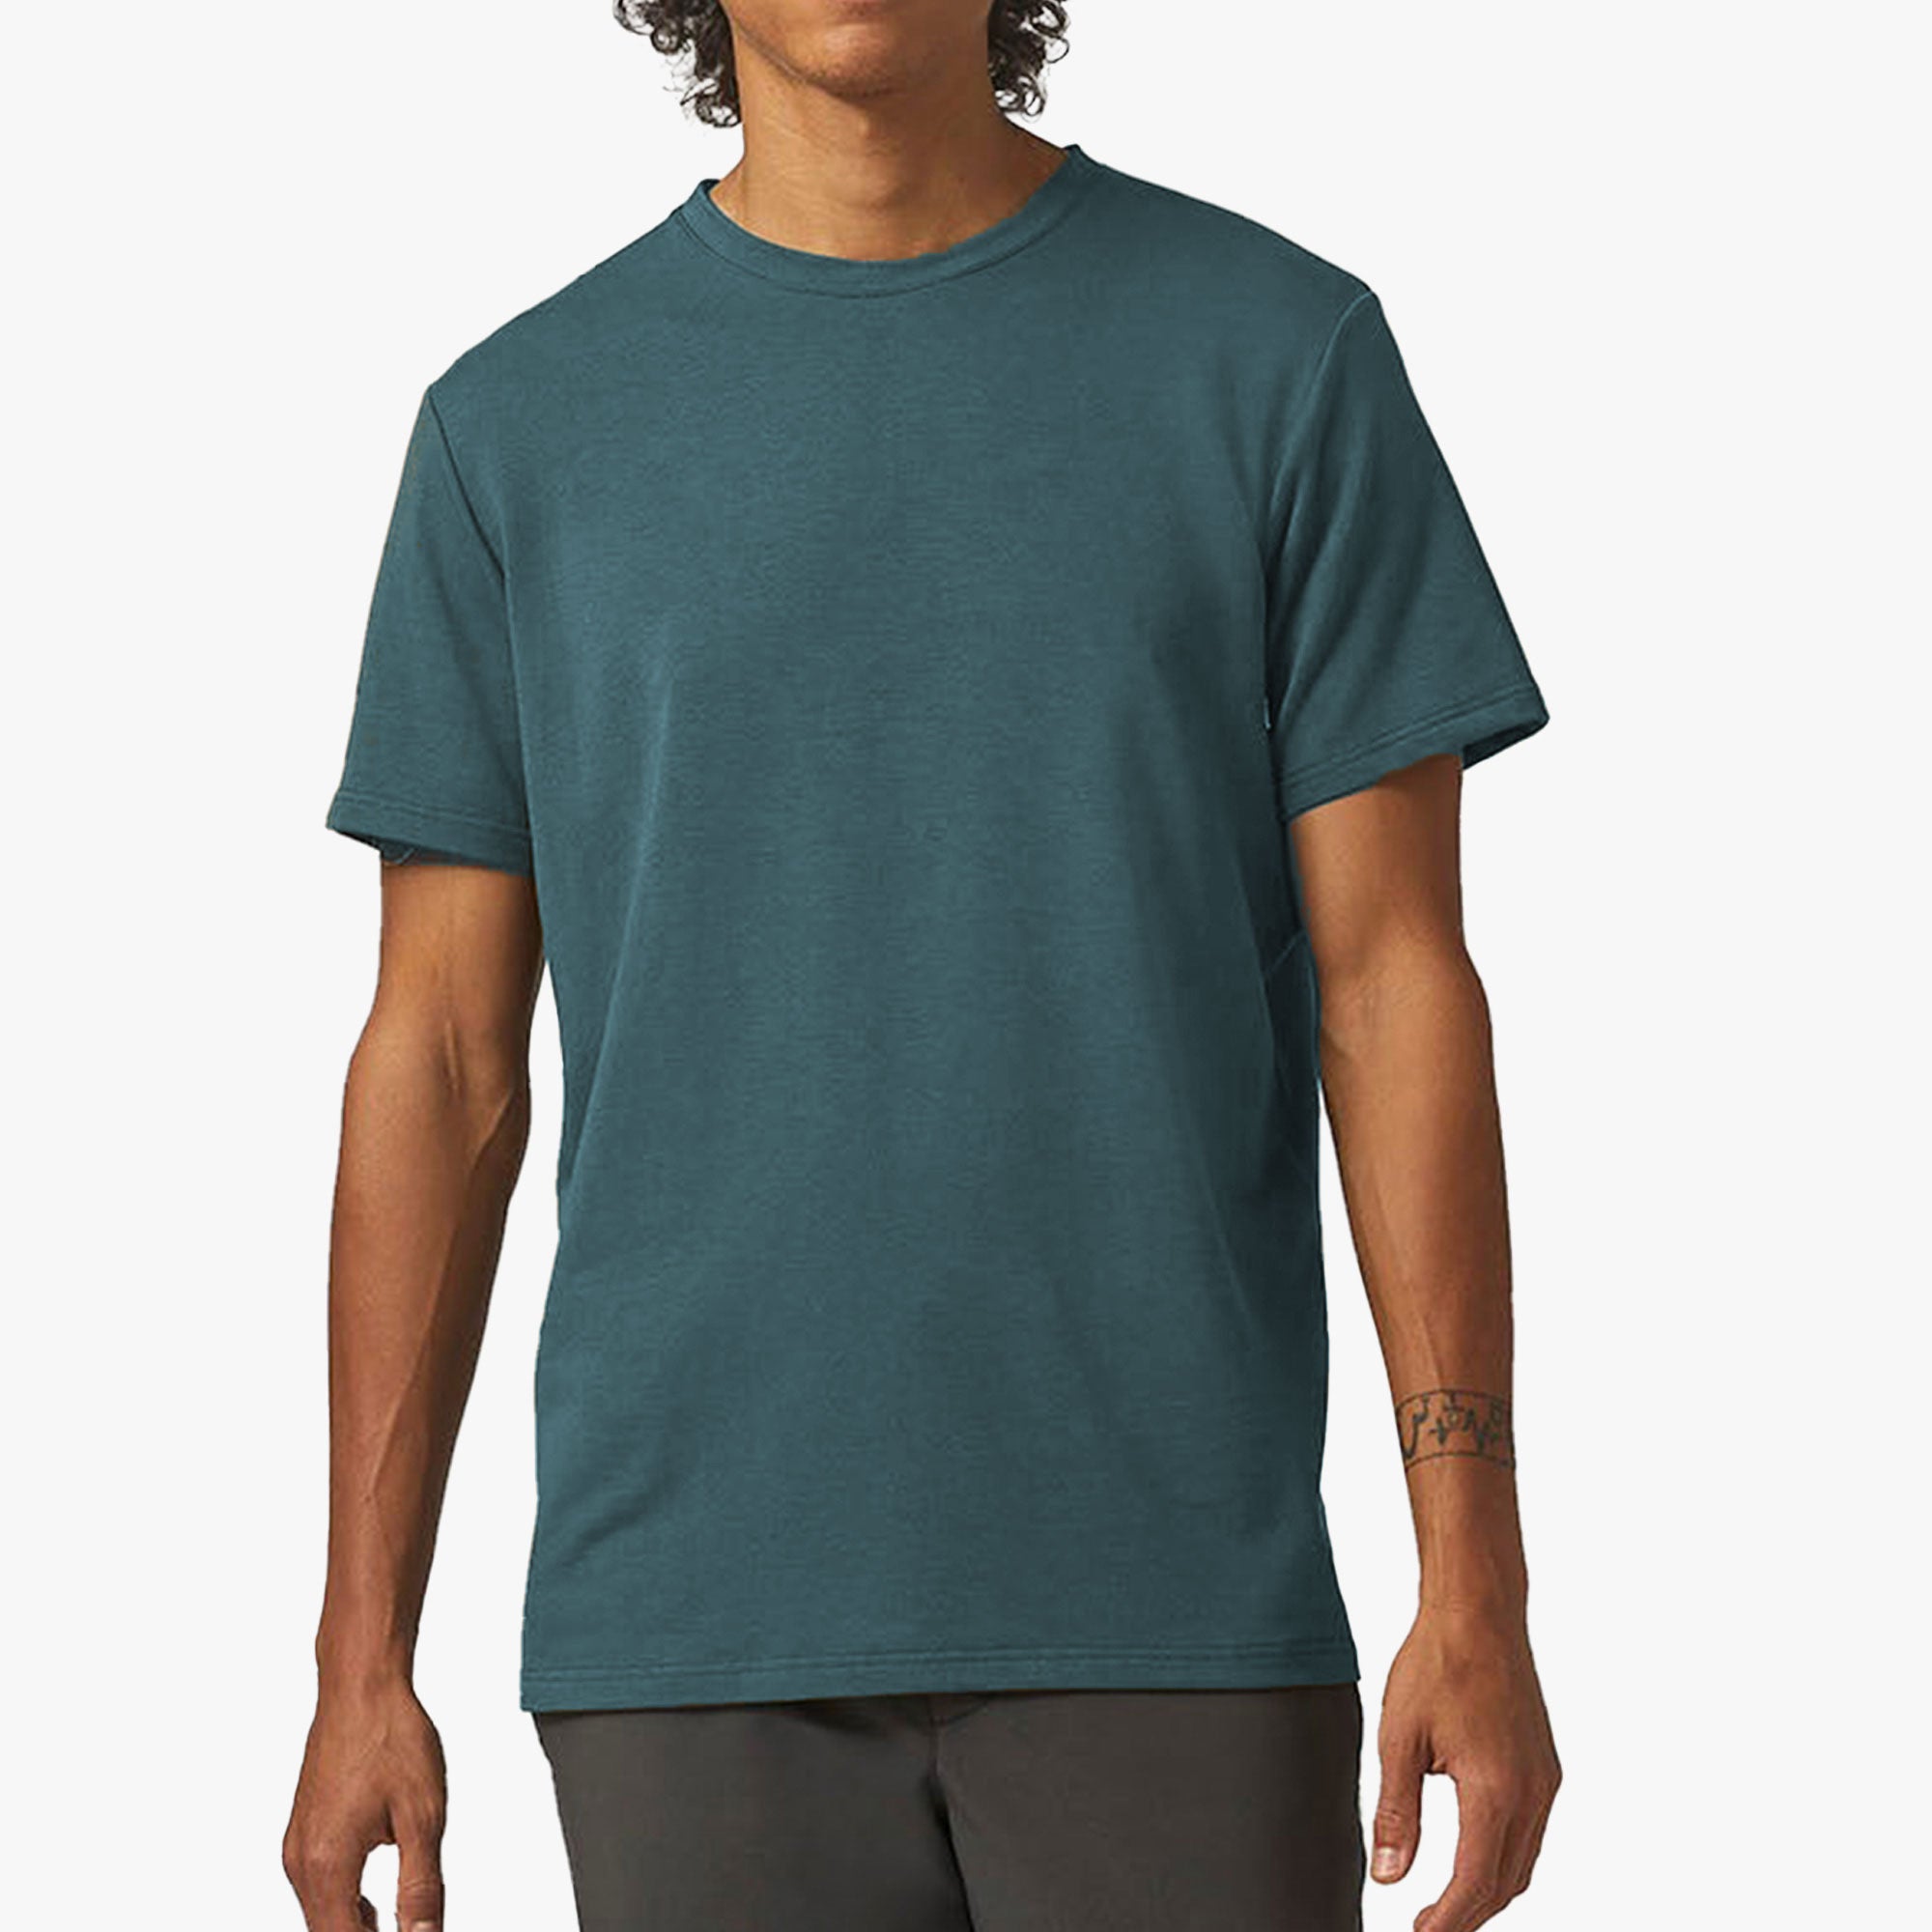 Adesso Man Bamboo T-Shirt - Dusty Teal